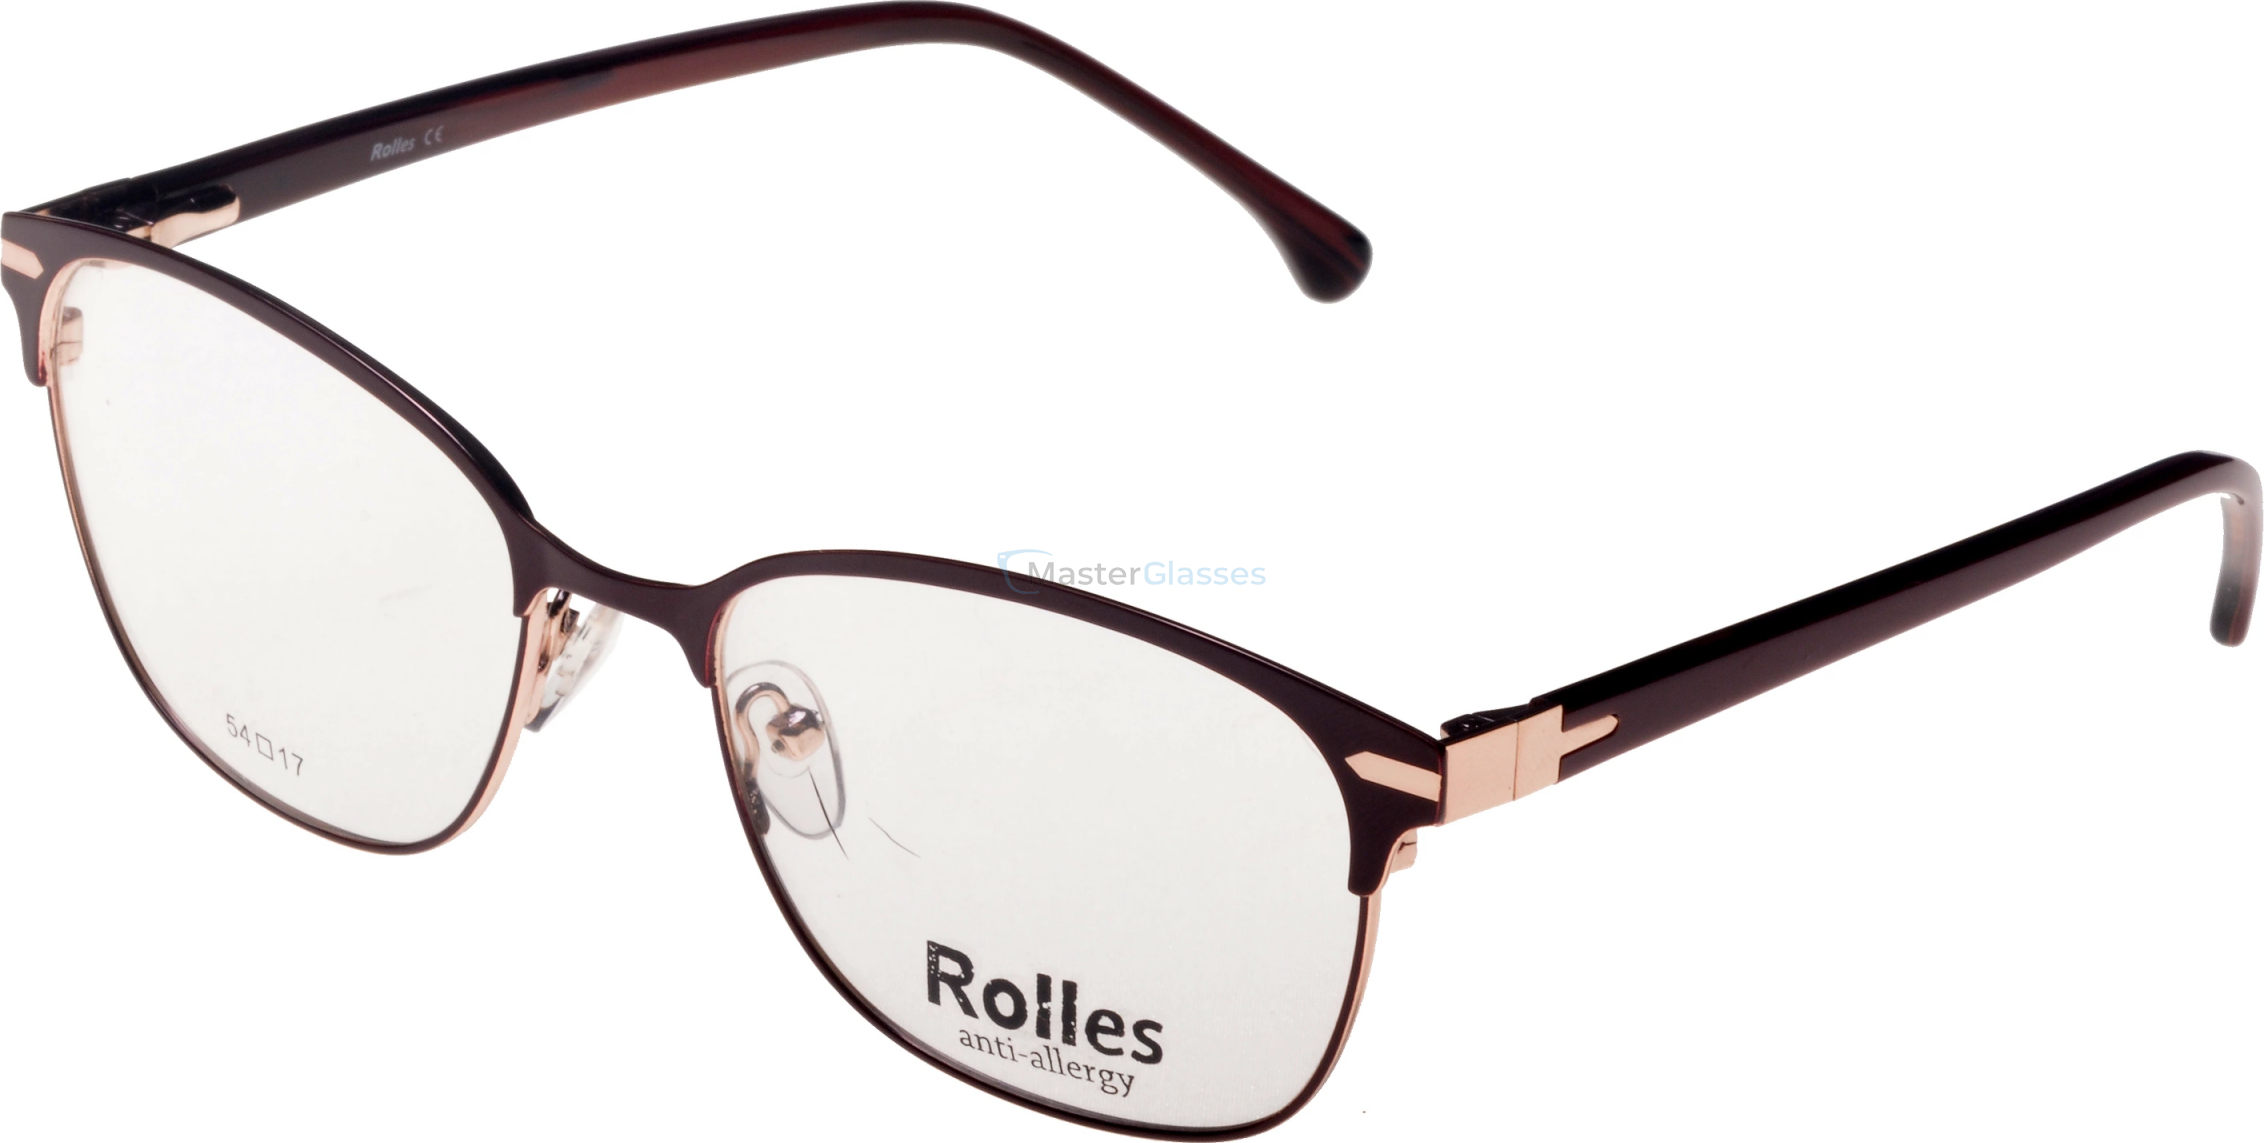  Rolles 591 02